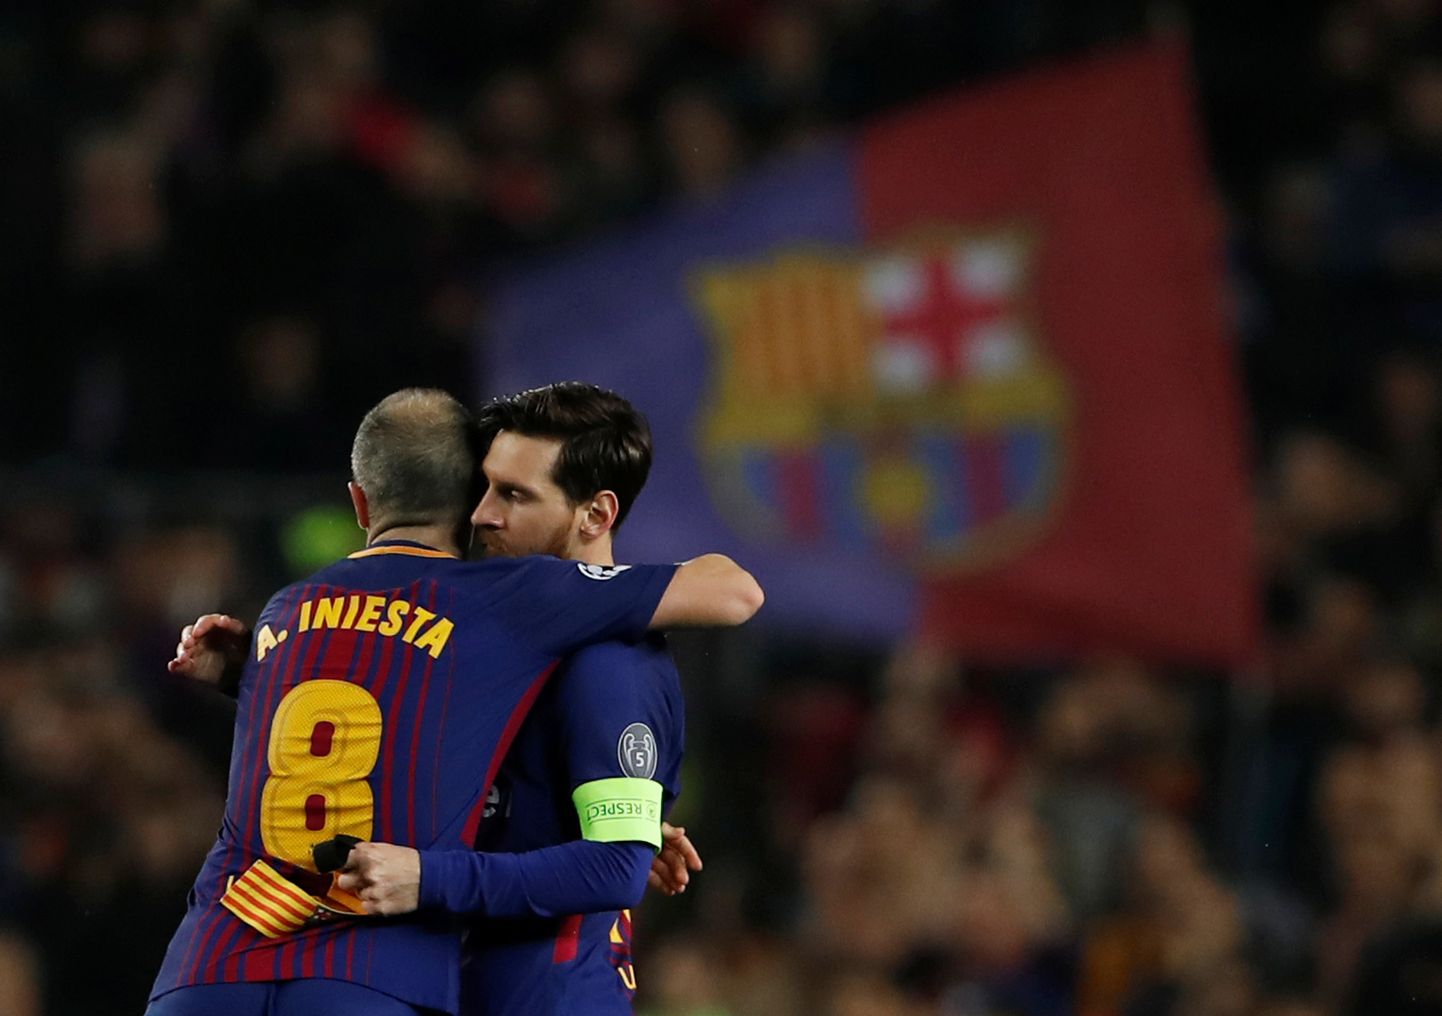 Soccer Football - Champions League Round of 16 Second Leg - FC Barcelona vs Chelsea - Camp Nou, Barcelona, Spain - March 14, 2018   Barcelona’s Andres Iniesta passes the captain's arm band to Lionel Messi as he is substituted off     Action Images via Reuters/Lee Smith